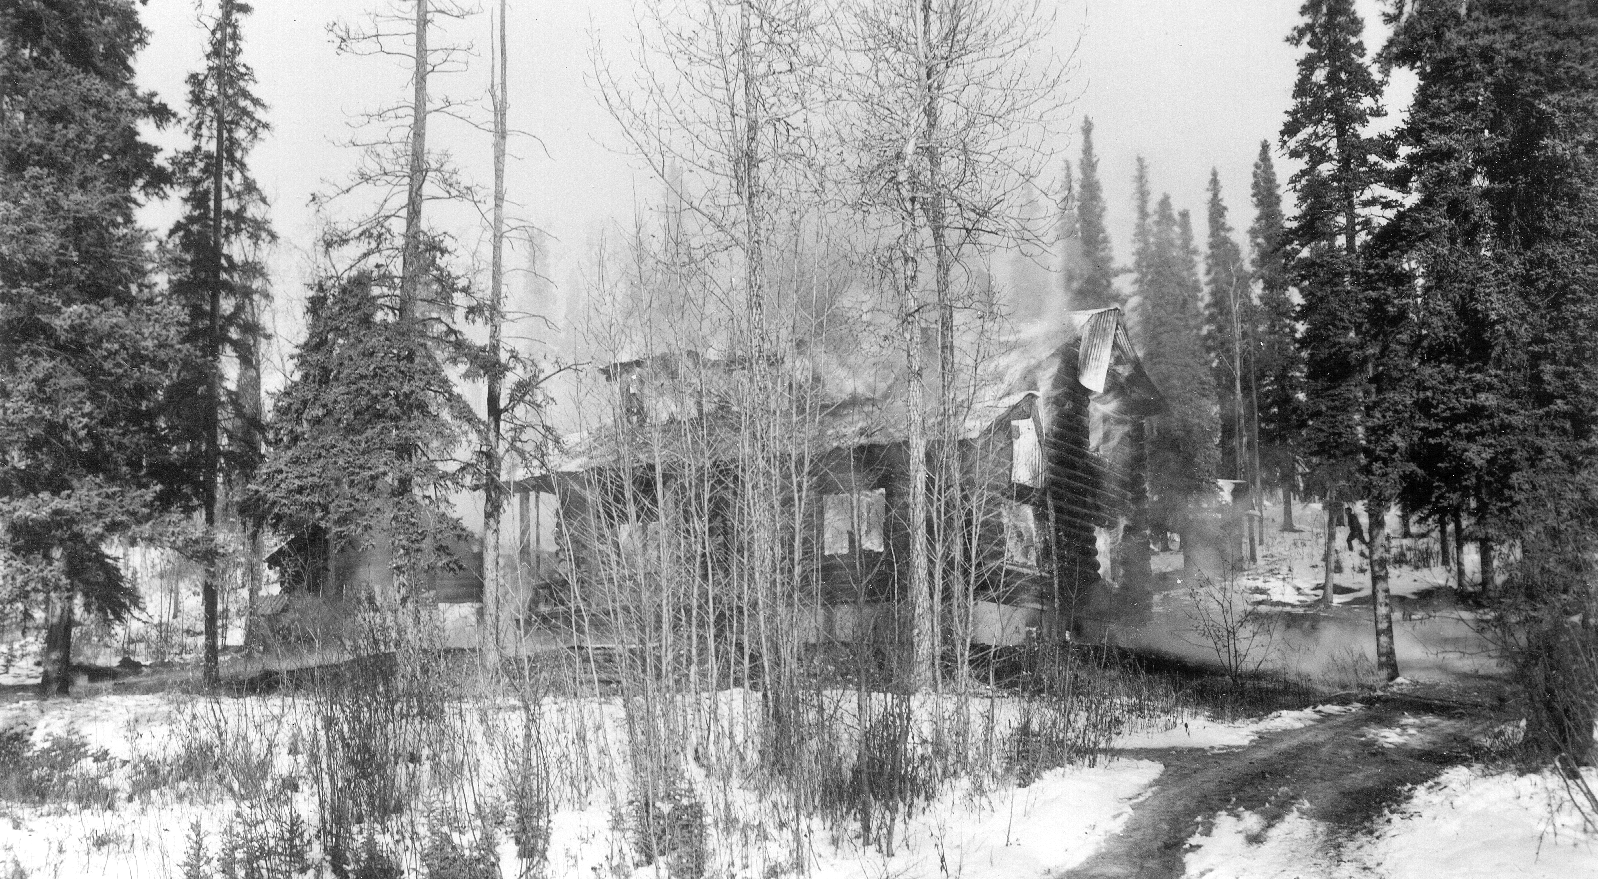 black and white image of a partially burnt building in a snowy forest